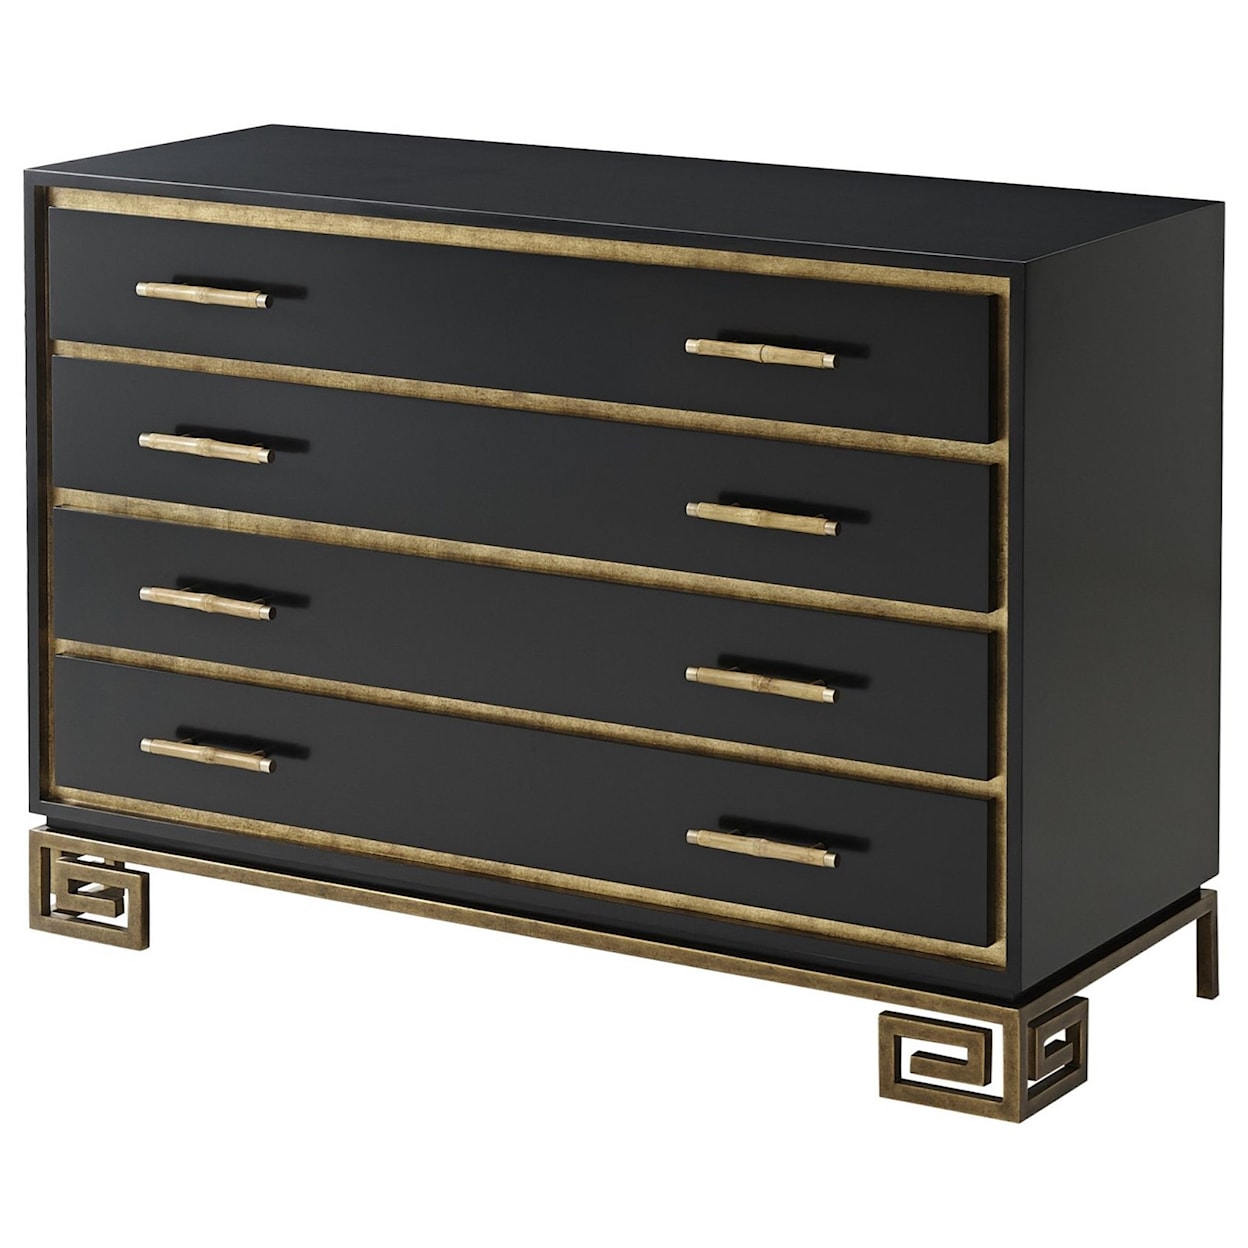 Theodore Alexander Vanucci Eclectics Inky Fascinate Chest of Drawers